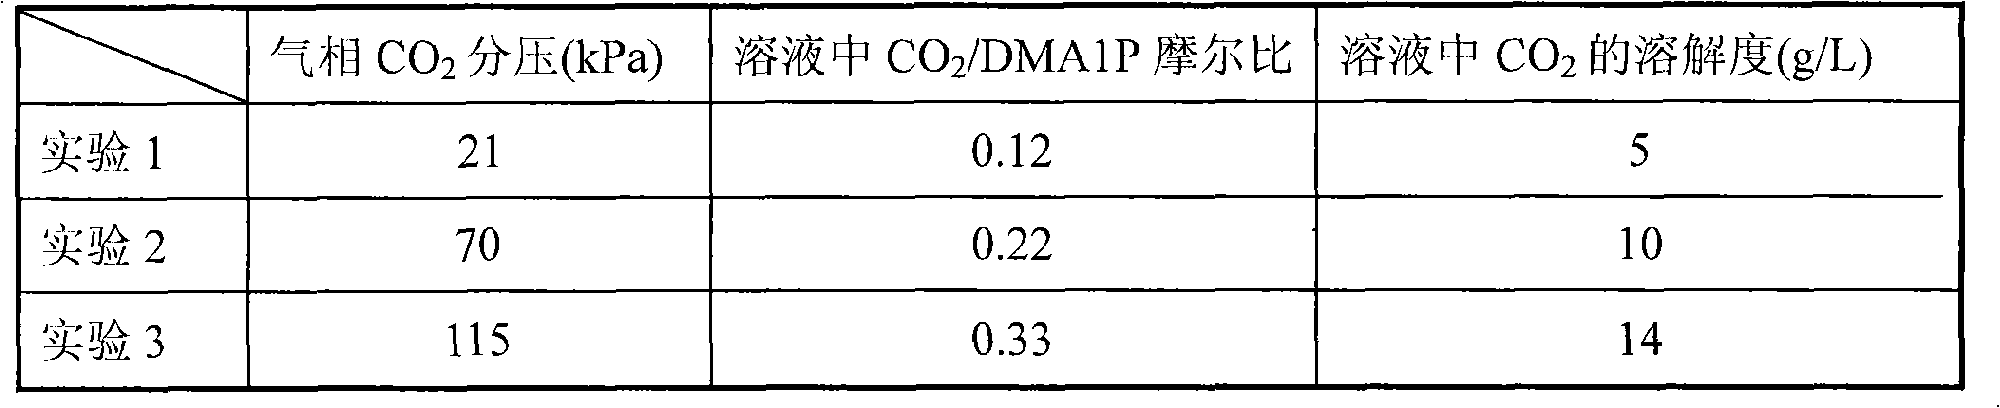 Absorption solvent used for catching or separating carbon dioxide